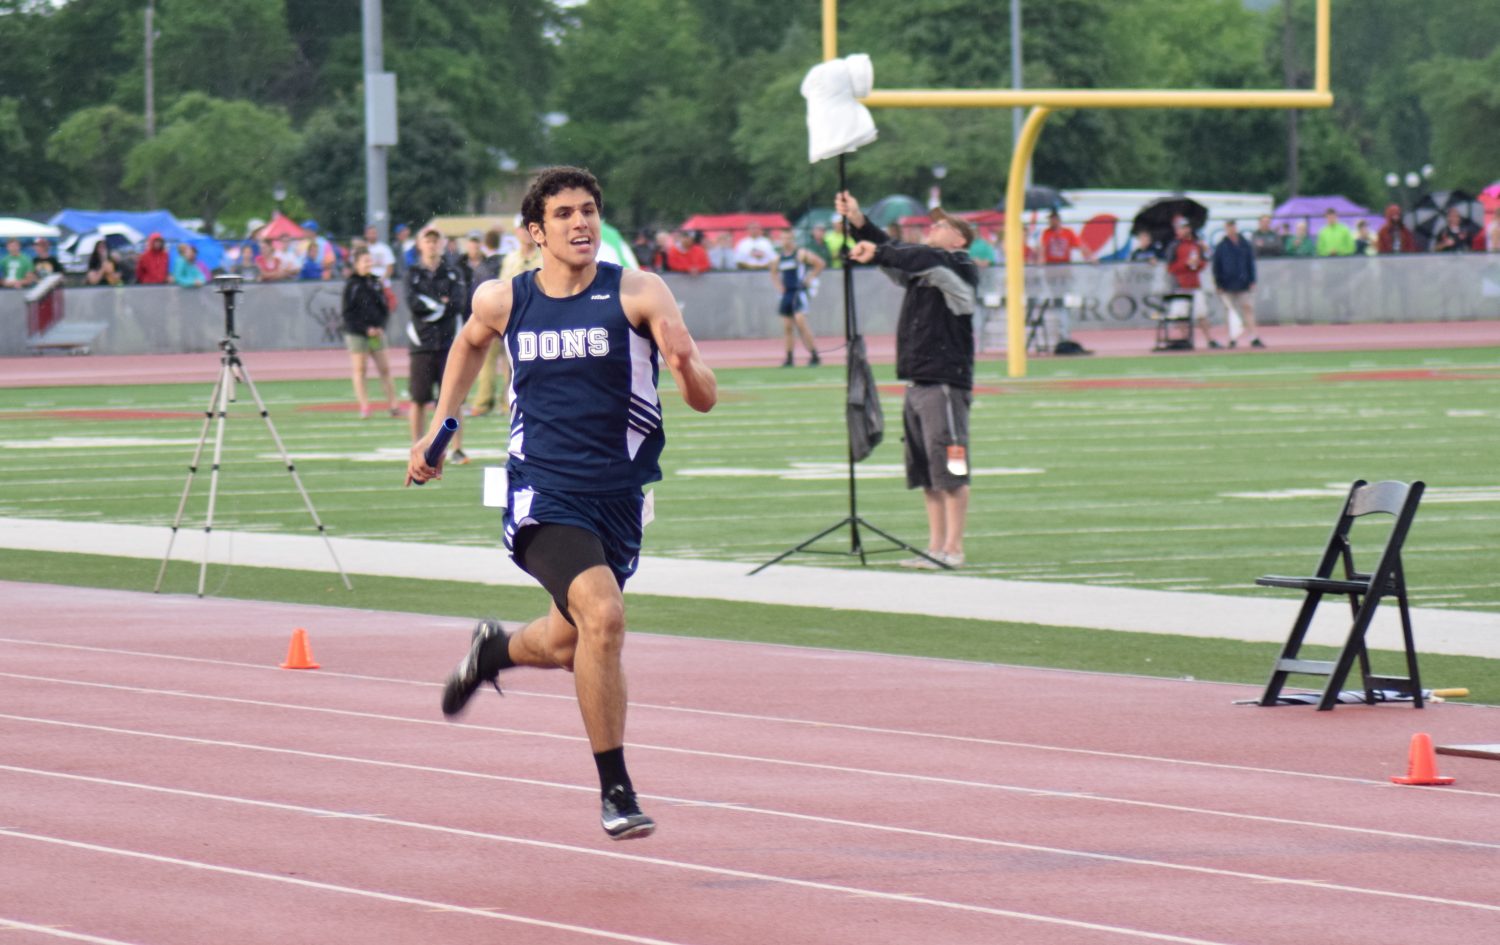 Farid Torbey runs the anchor leg of Marshfield Columbus Catholic's boys 800-meter relay at the 2016 WIAA State Track & Field Championships at the University of Wisconsin-La Crosse on June 3. The team finished in 1:35.30, earning the 10th and last spot in Saturday's finals.